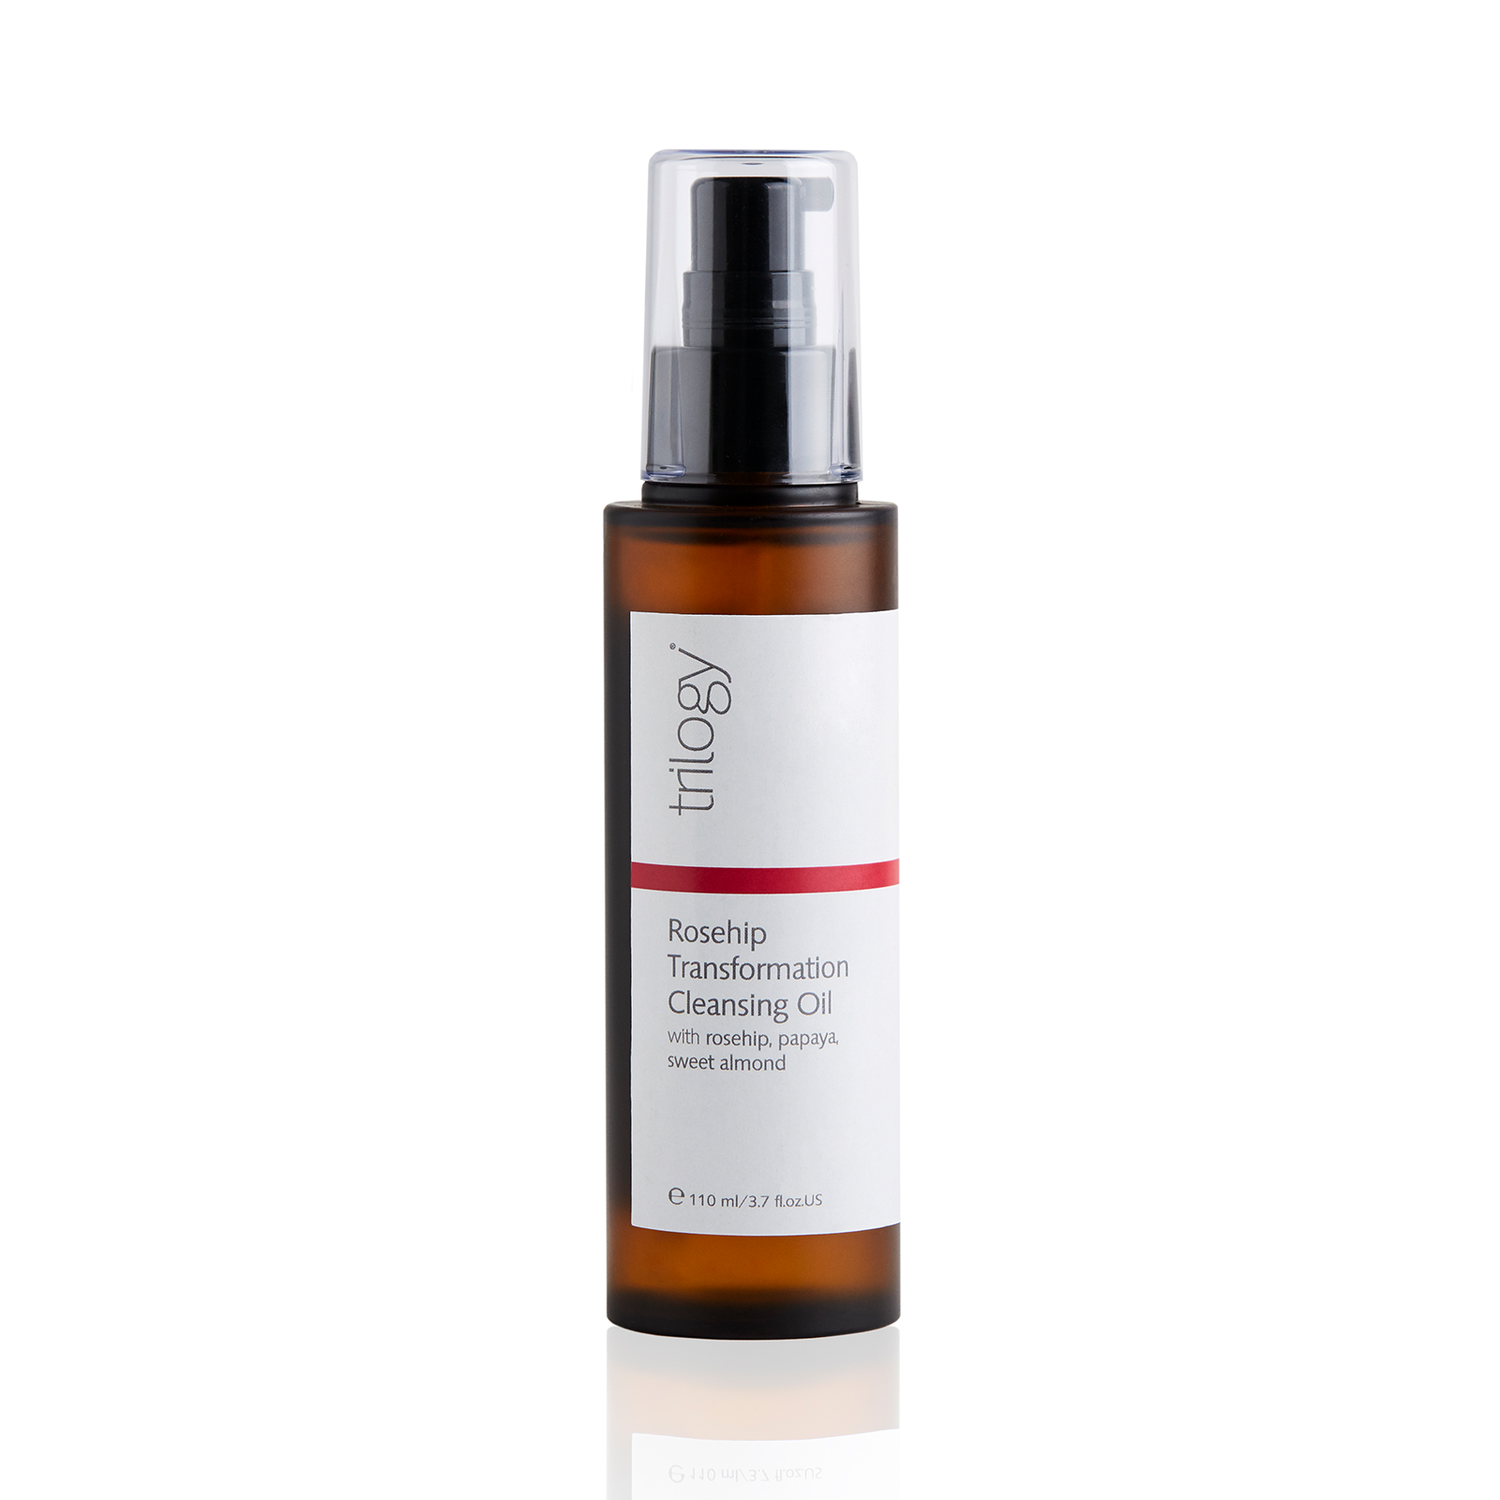 Trilogy Rosehip Transformation Cleansing Oil - 110ml